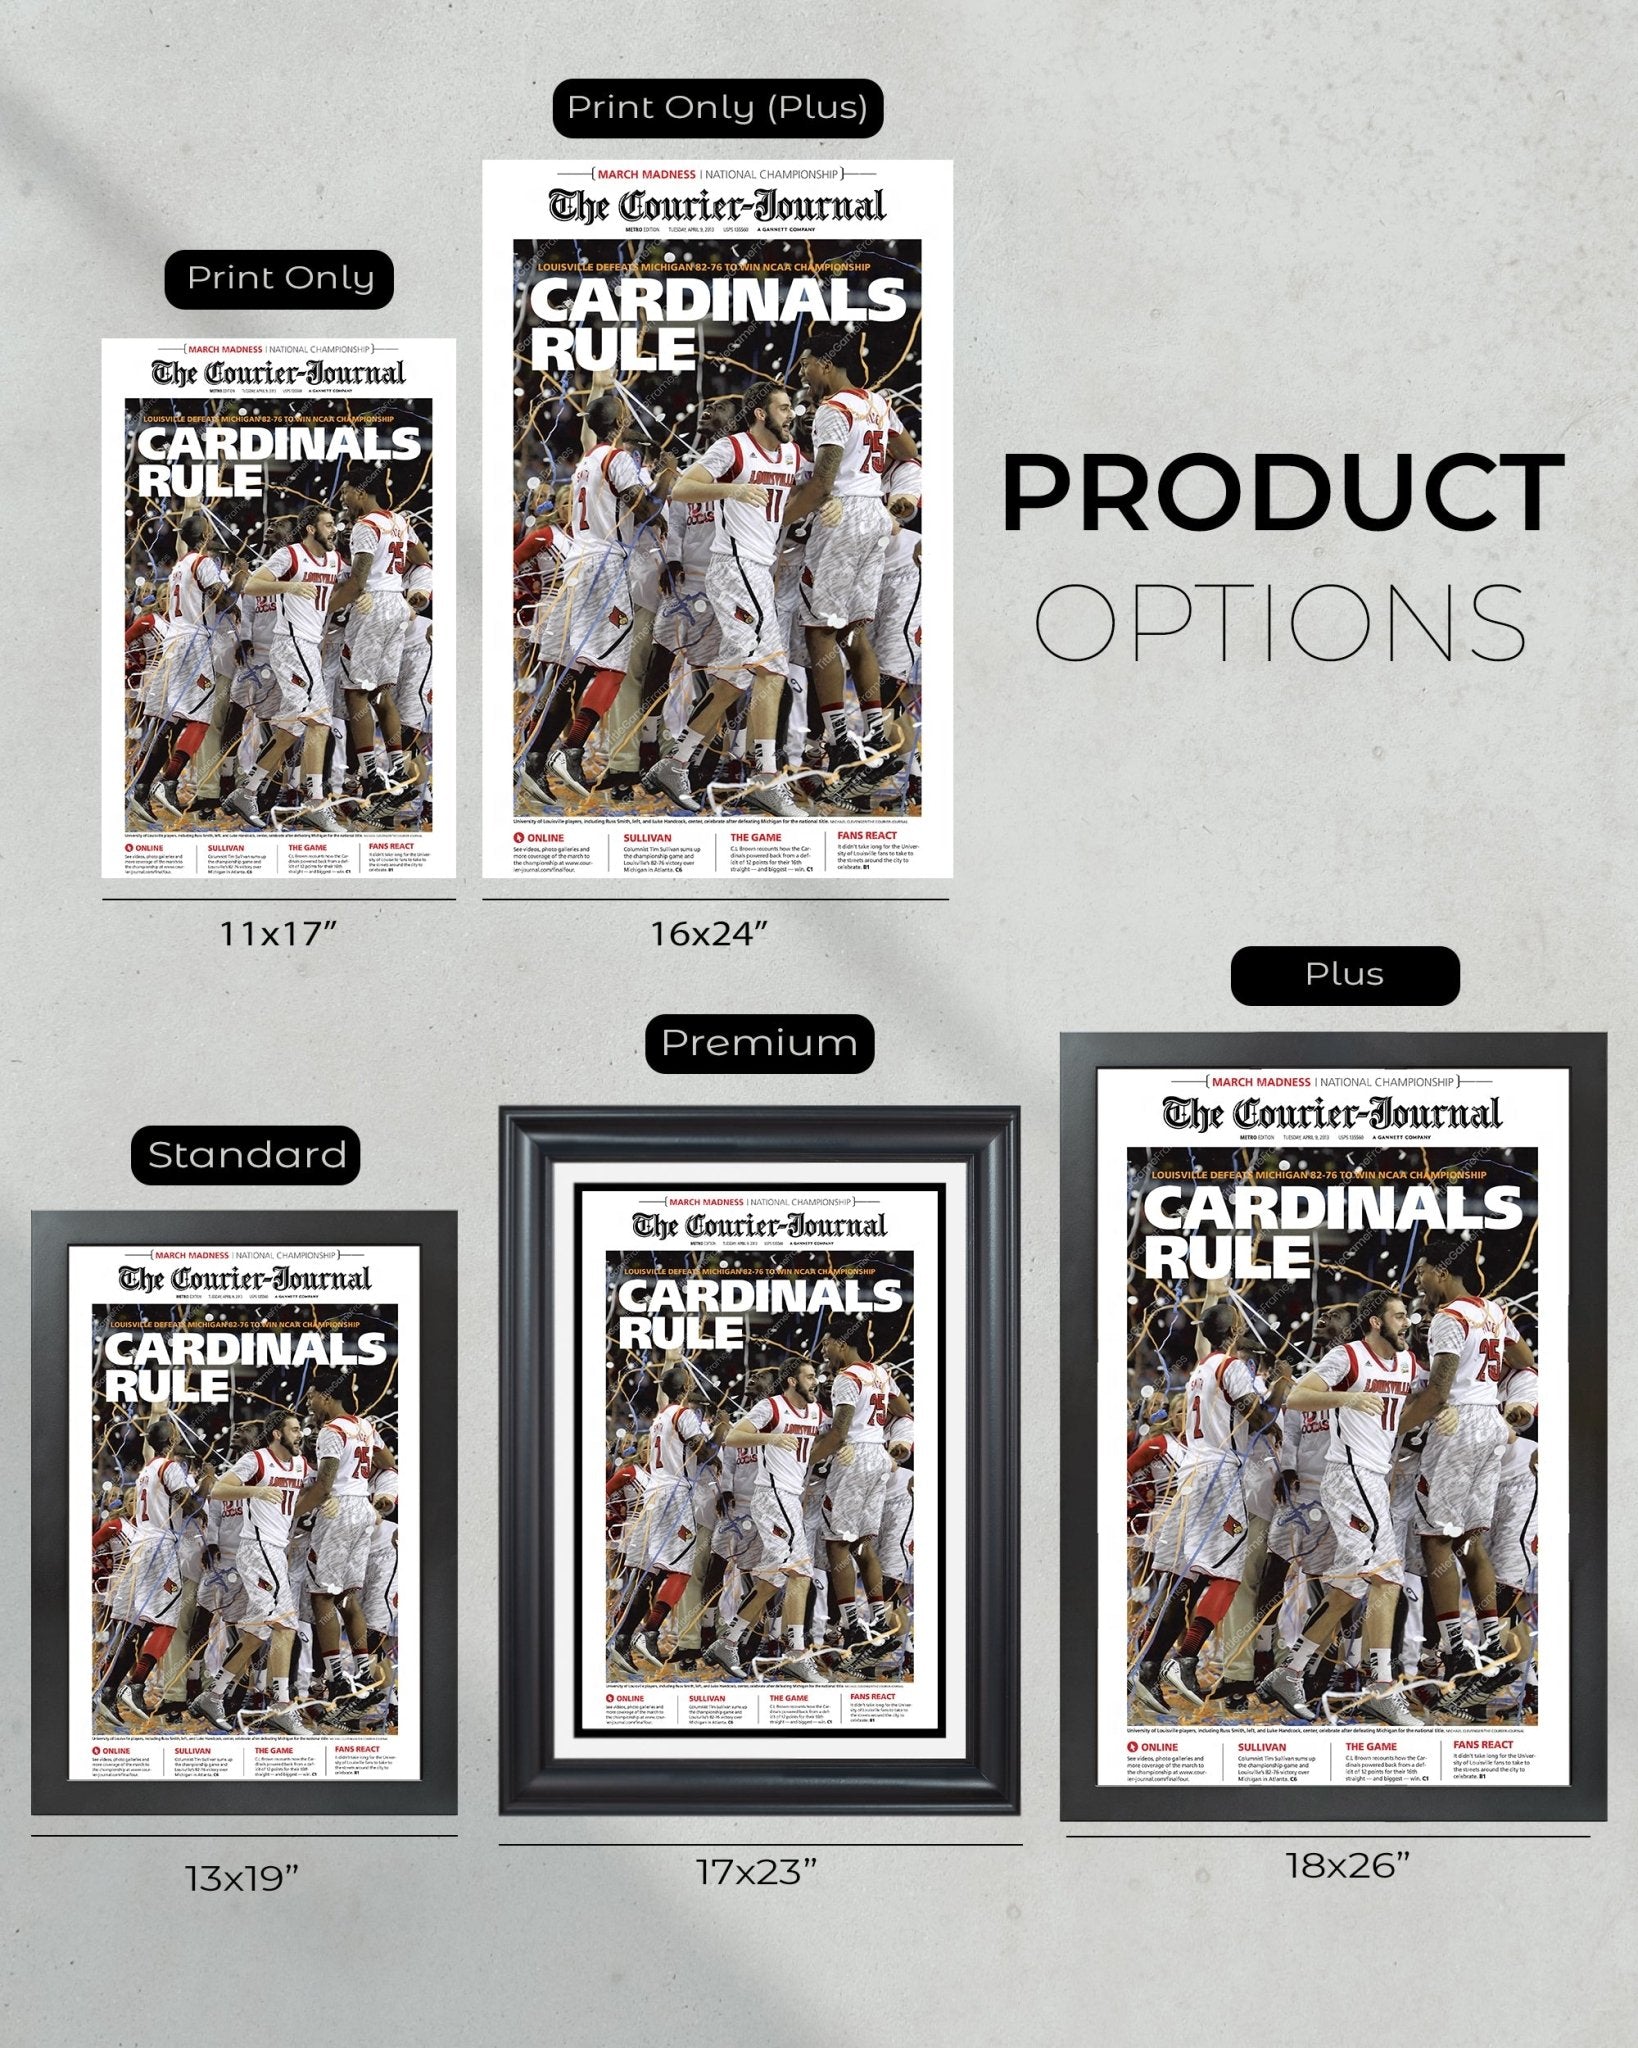 2013 Louisville Cardinals NCAA College Men’s Basketball Champions Framed Front Page Newspaper Print - Title Game Frames